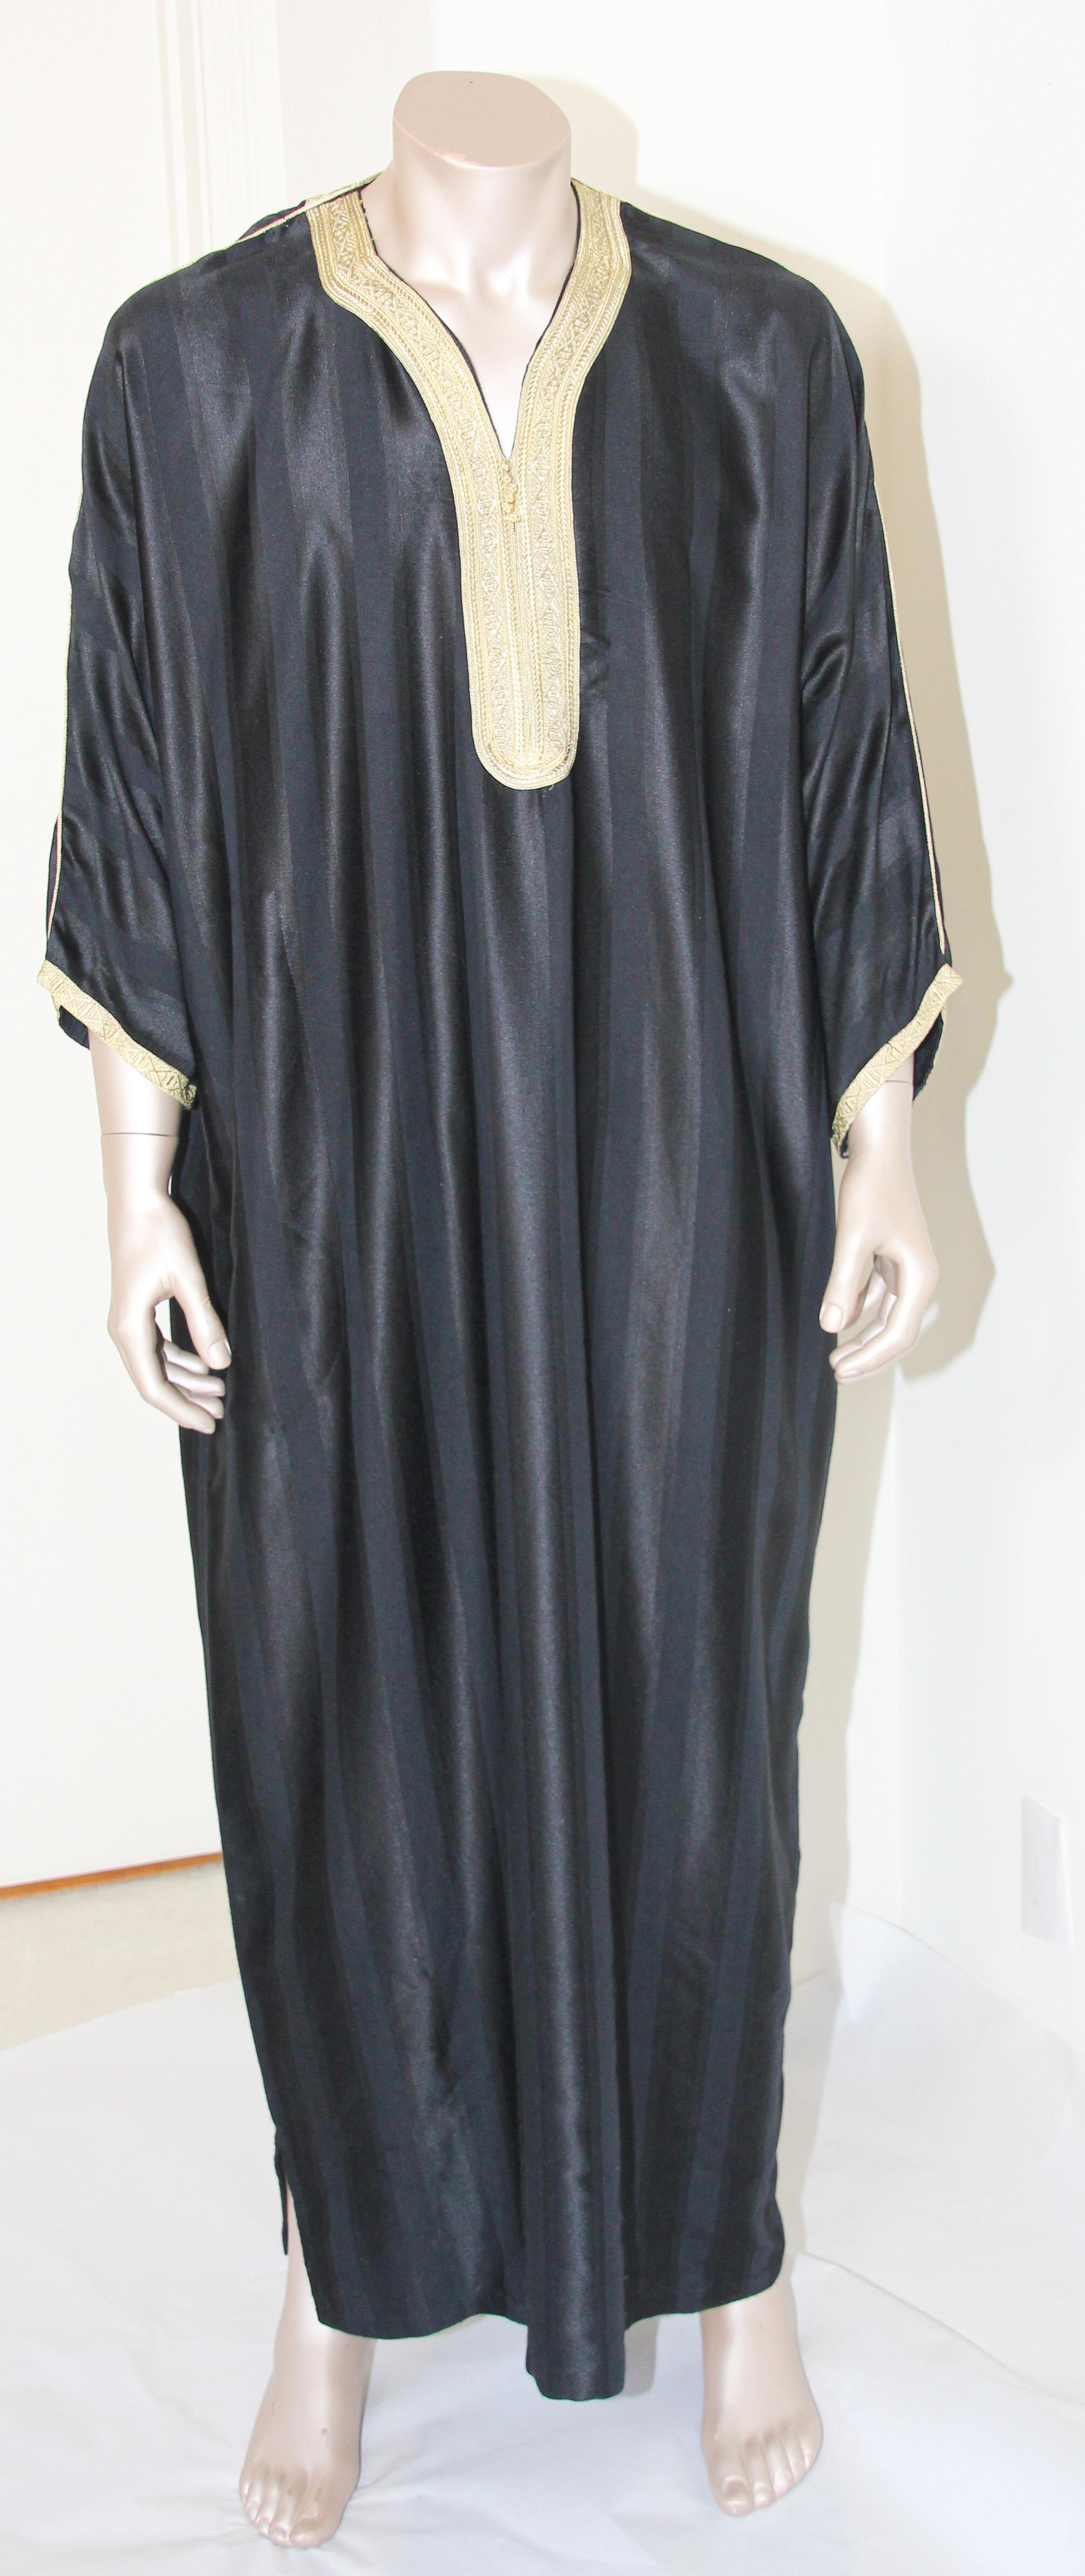 Moroccan gentleman vintage black caftan embellished with gold trim.
In Morocco, fashion preserves its traditional style inherited from great civilizations that found their way to Northwest Africa, such as the Ottomans and the Moors.
Moroccan fashion